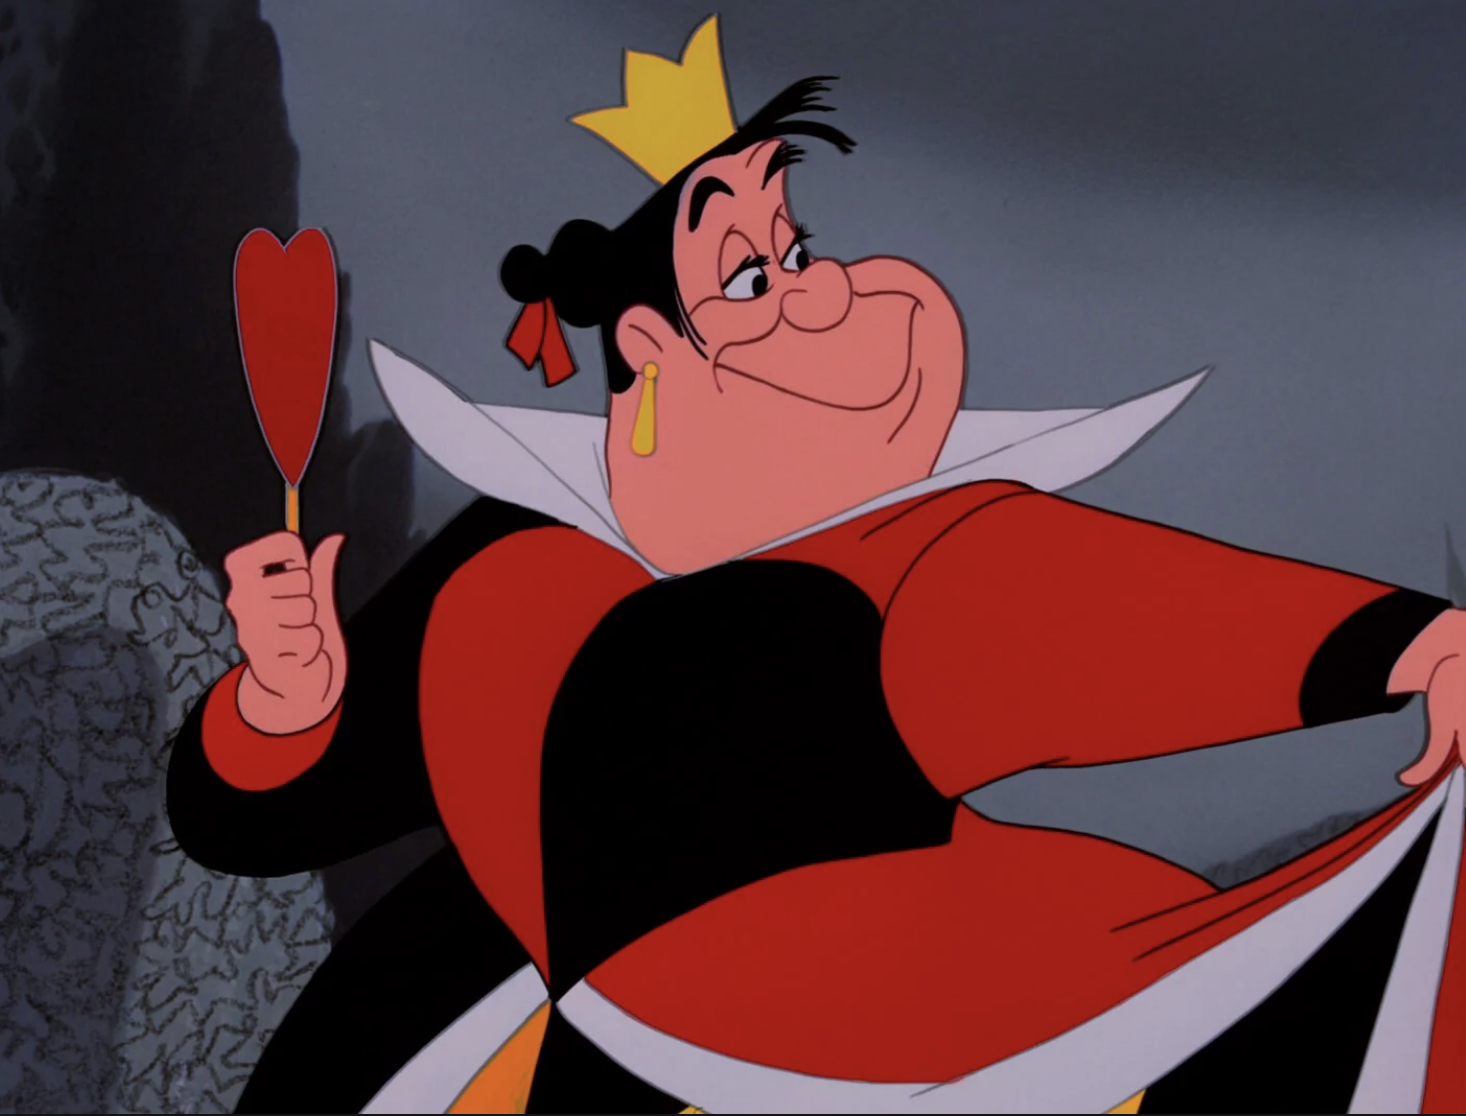 We Ranked The Disney Villains From Least Gay To Most Gay